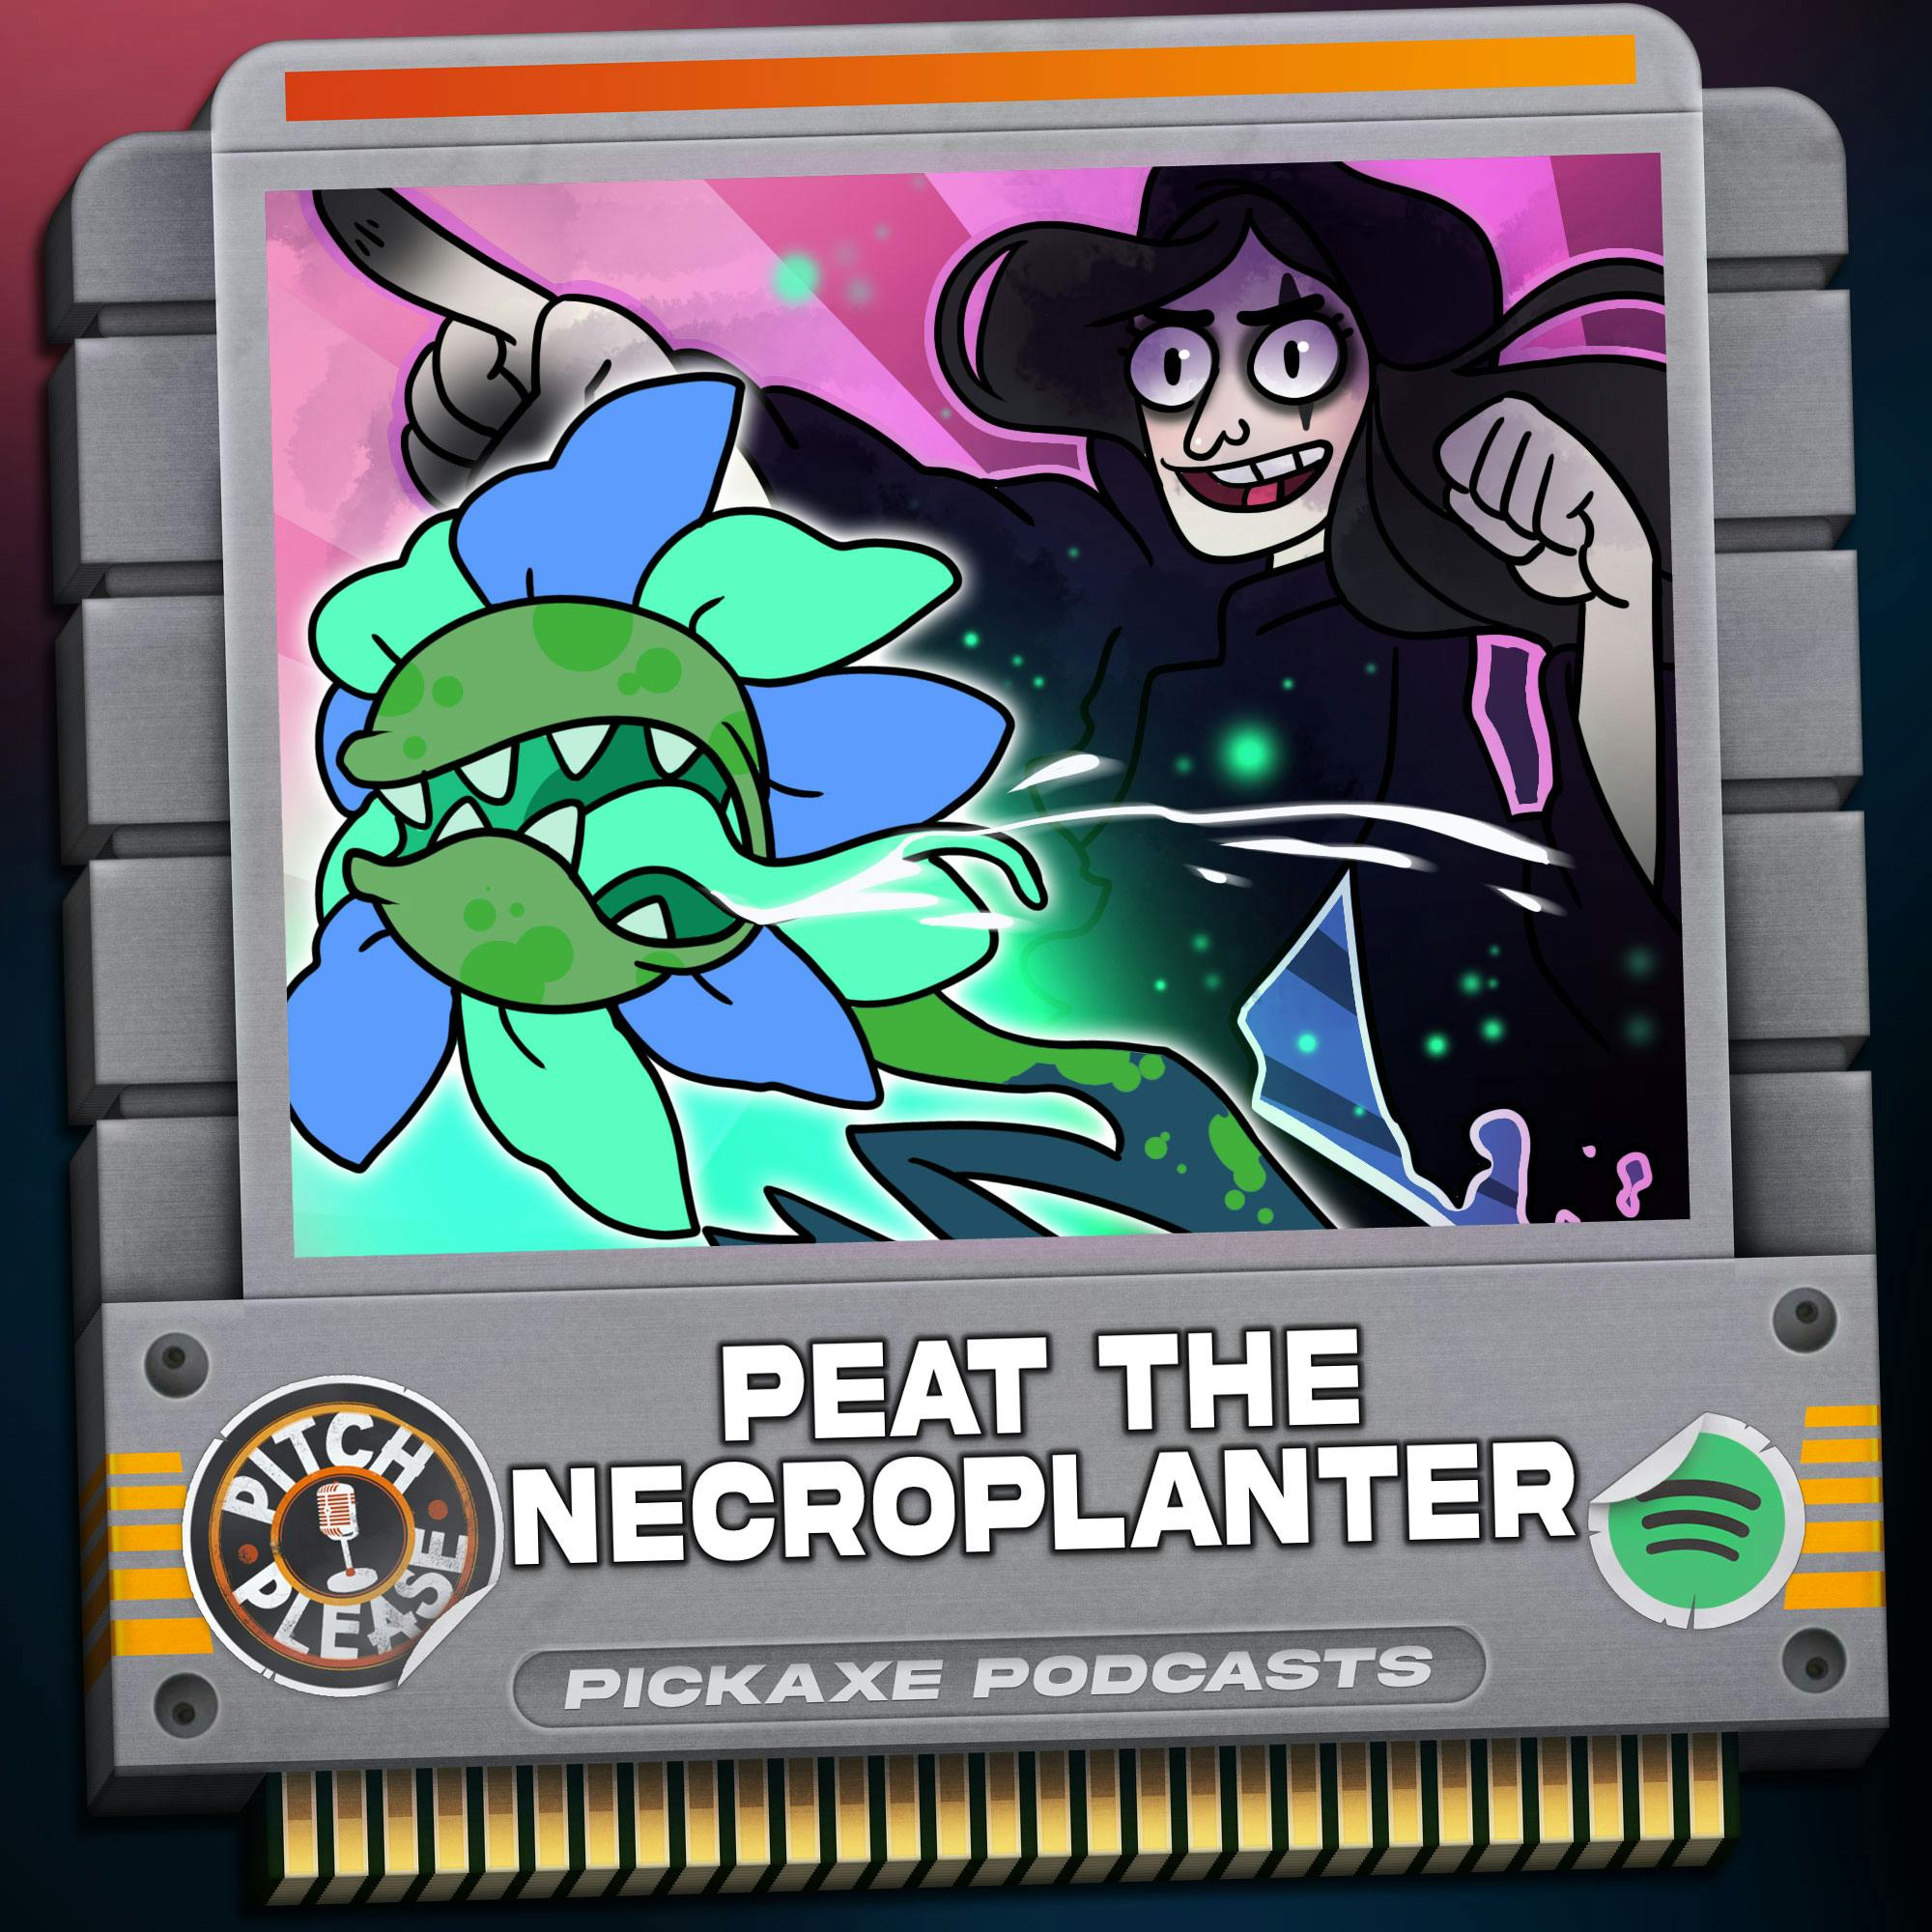 Pitch, Please - Peat the Necroplanter